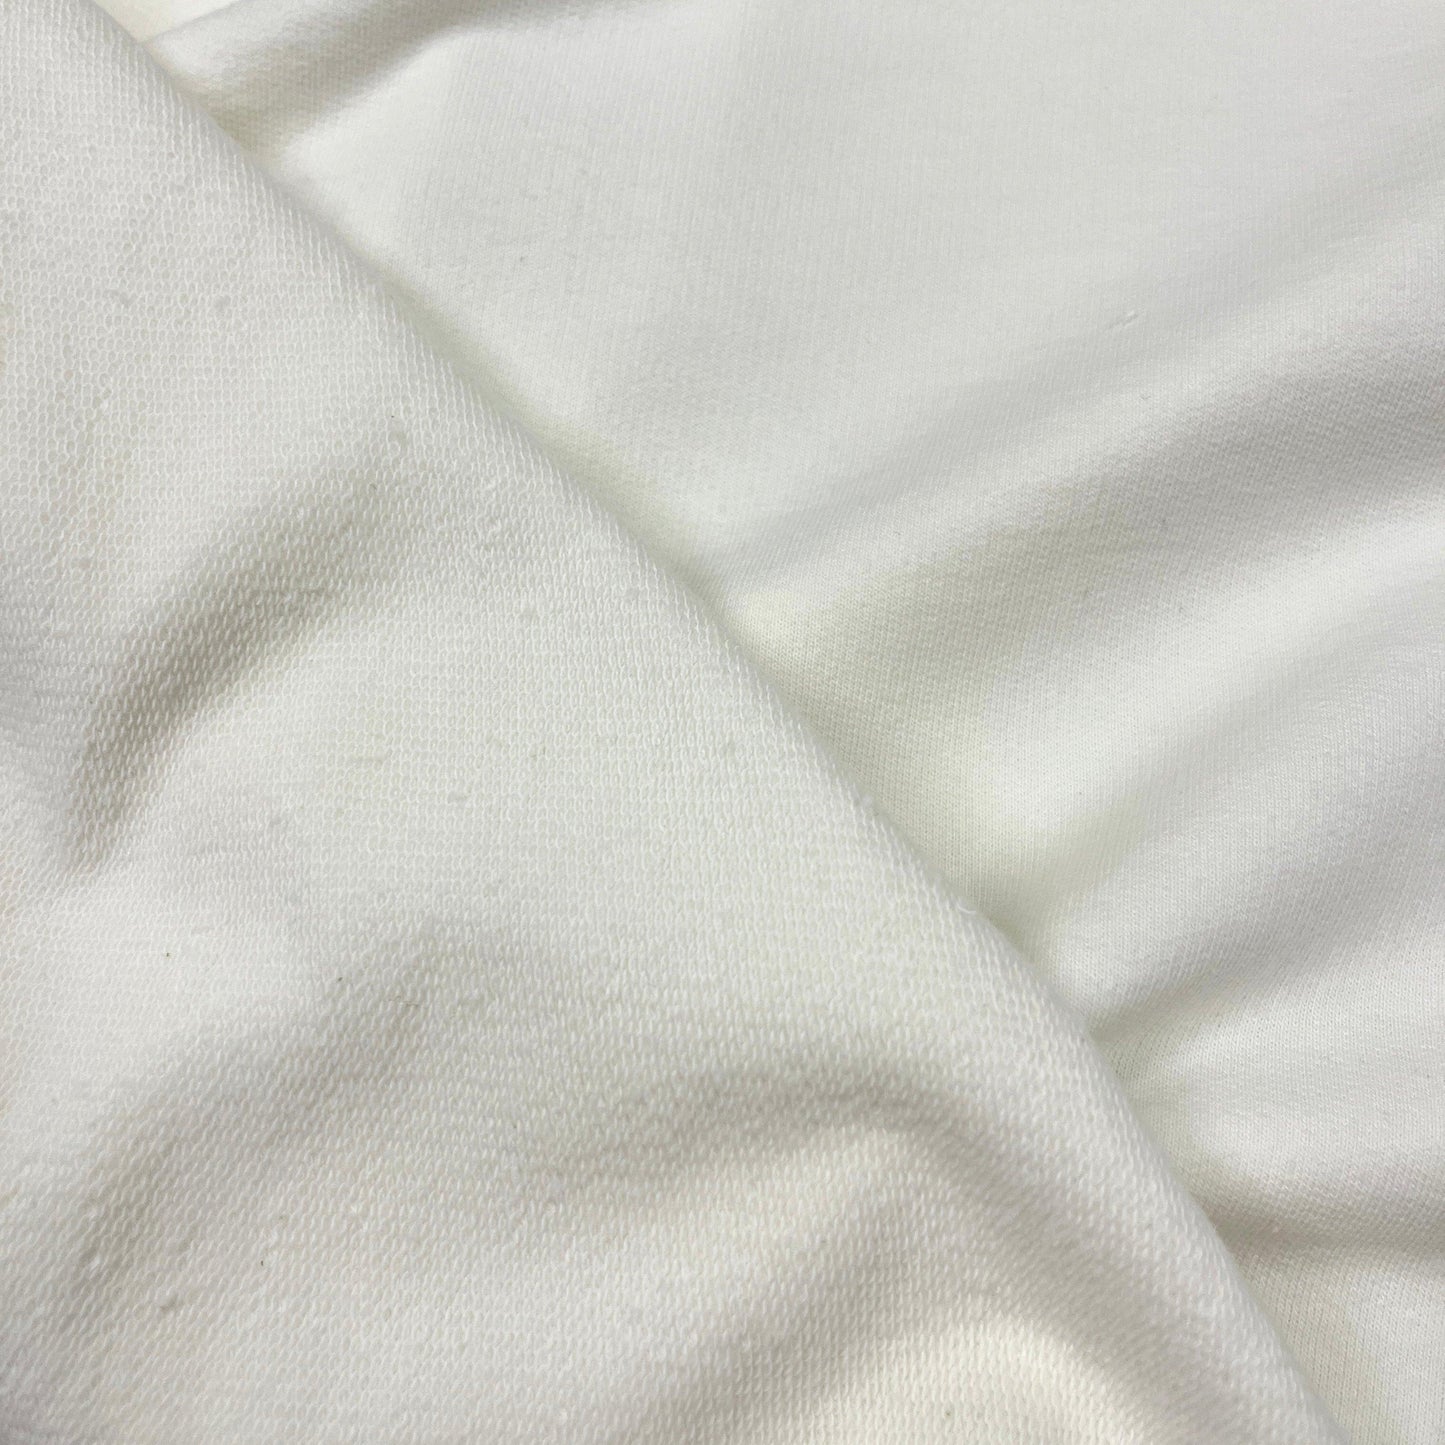 Off White Medium Weight Organic Cotton French Terry Fabric - Grown in the USA - Nature's Fabrics